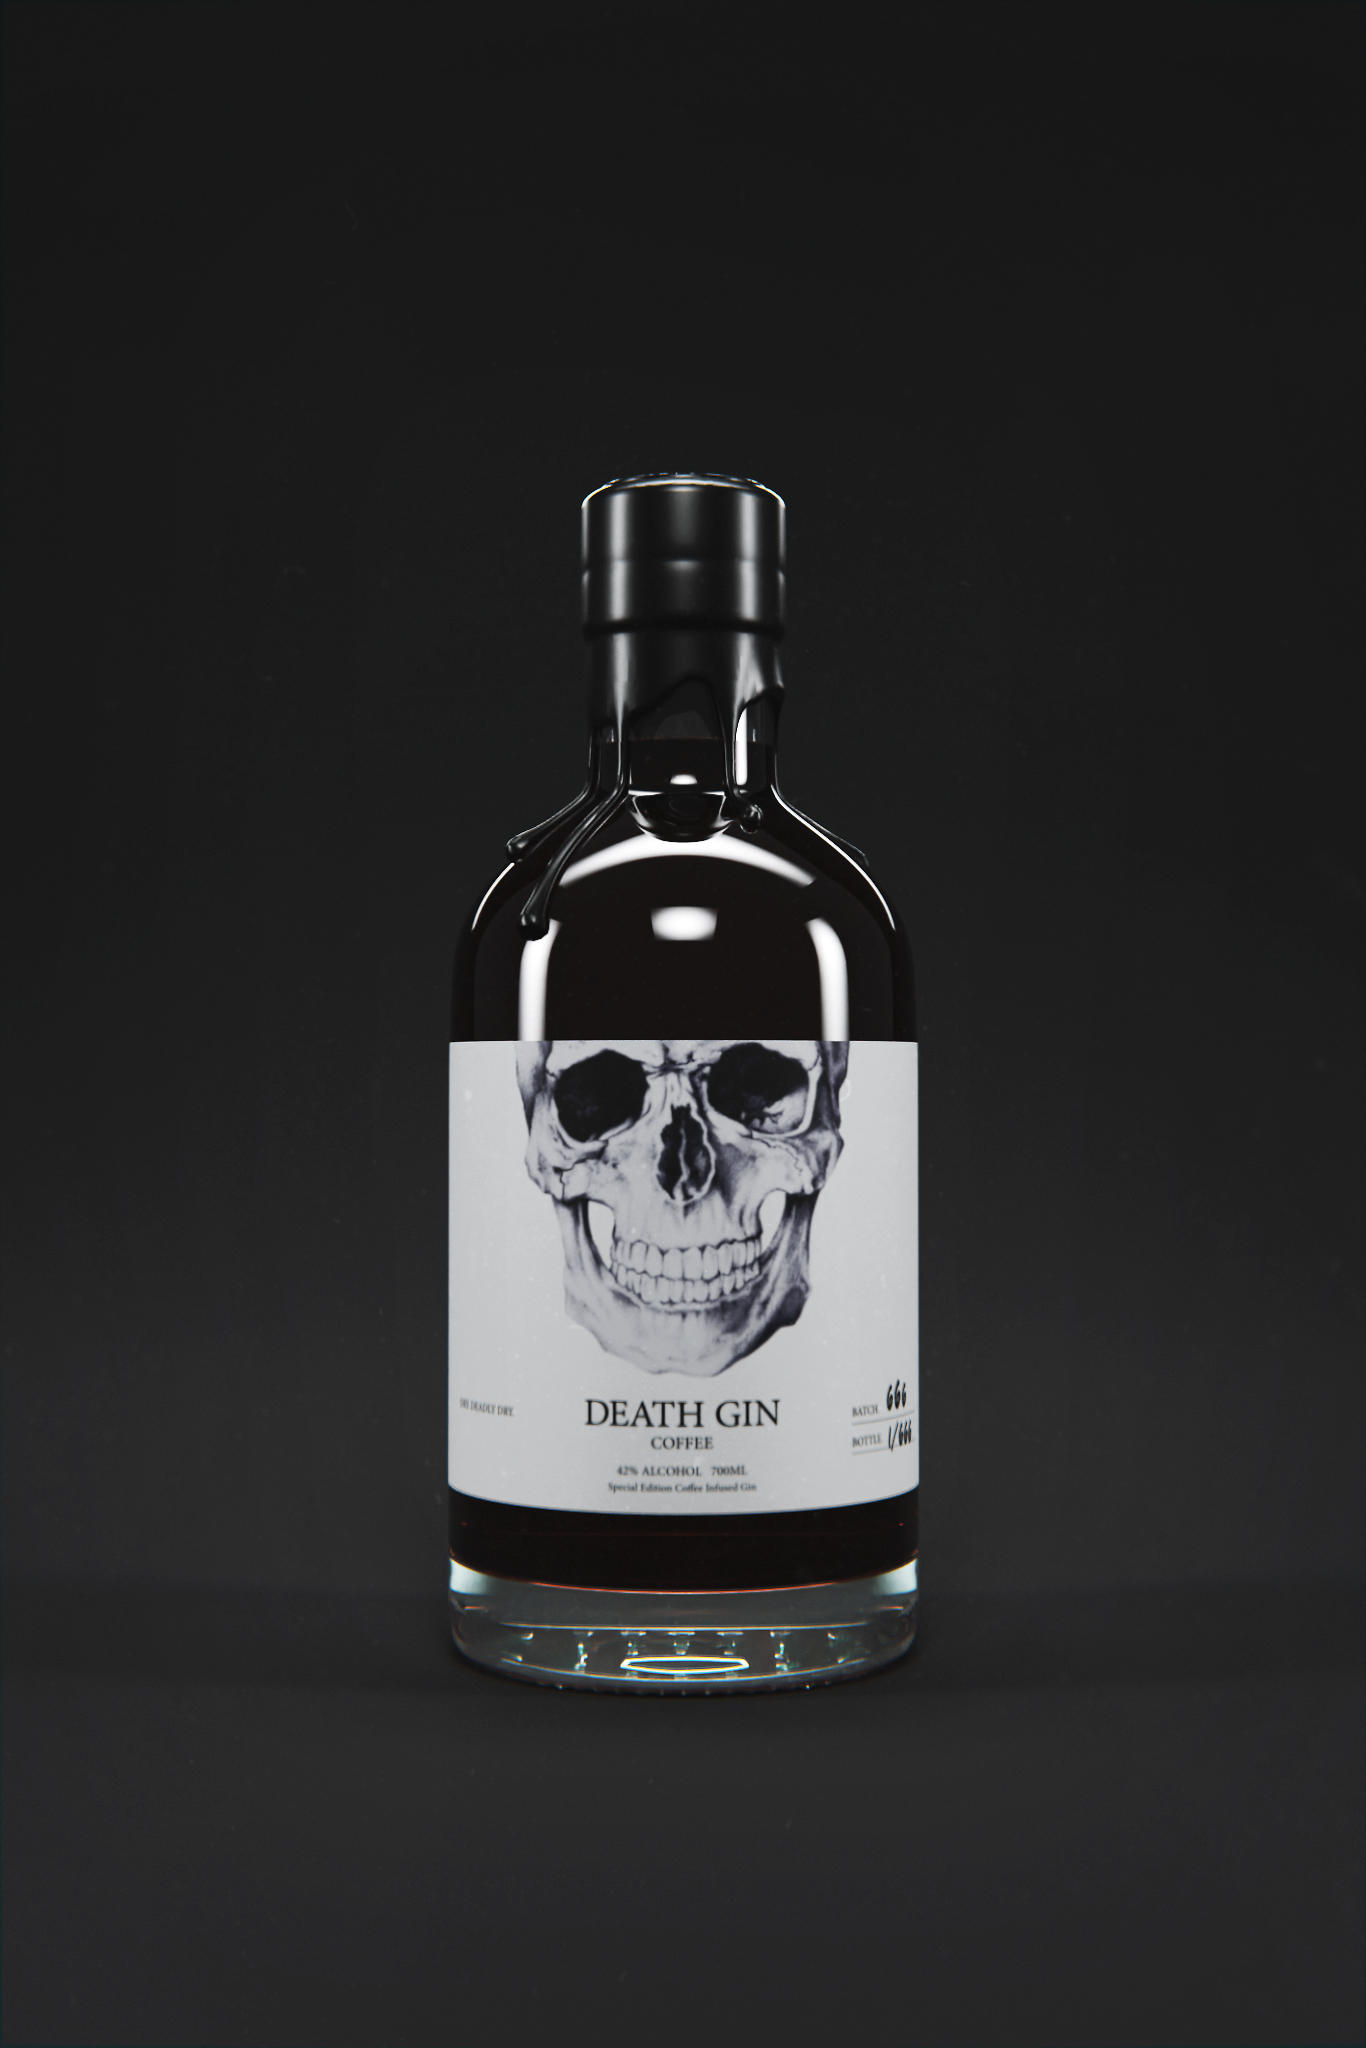 Coffee Comp - Death gin 3D product visualization - Sonny Nguyen